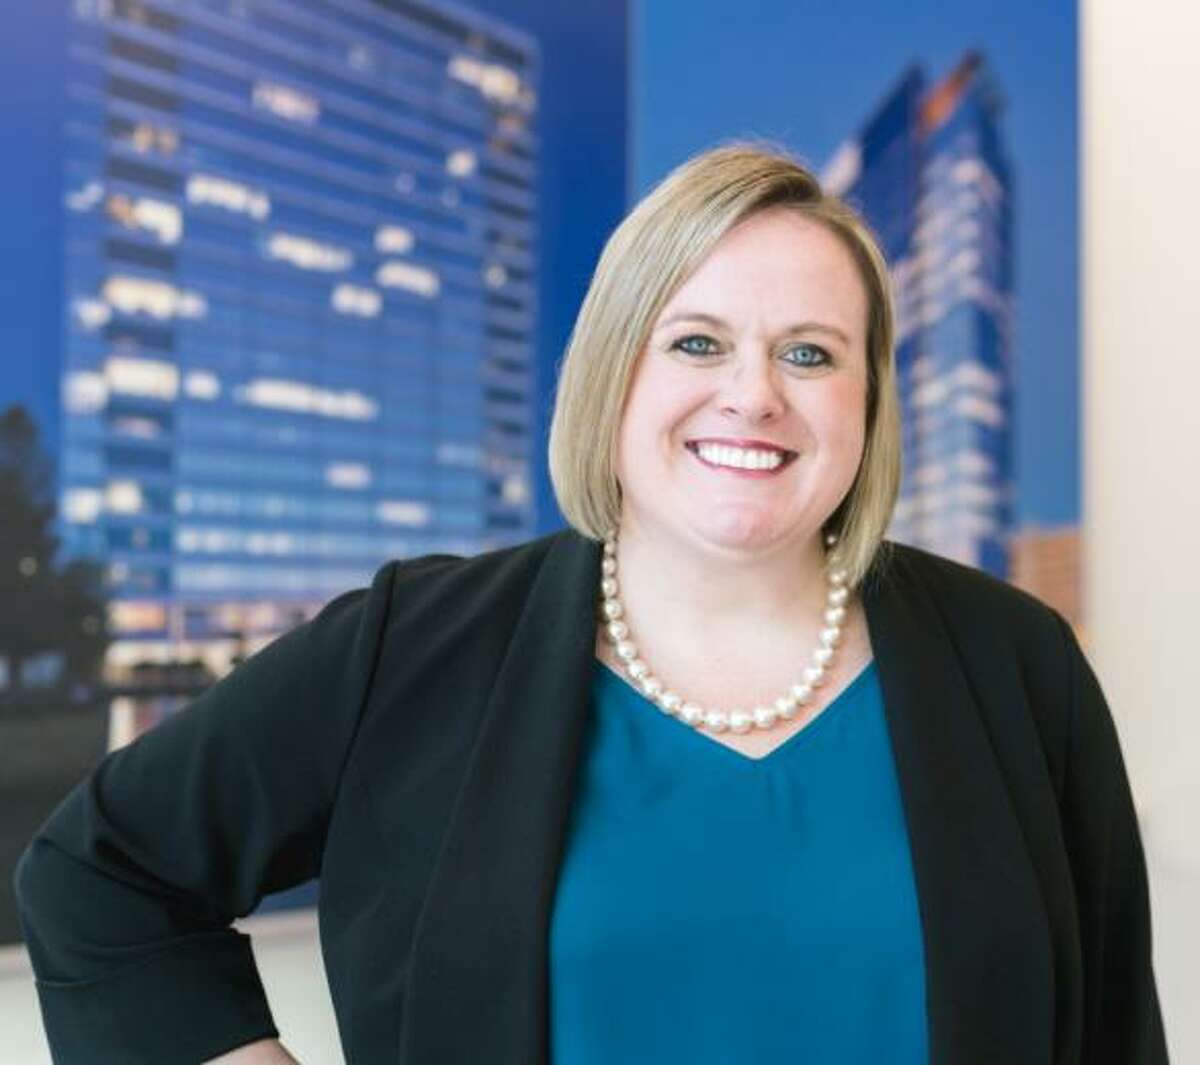 Crystal McDonald has joined Kirksey as chief financial officer and vice president.Â McDonald brings 15 years of accounting experience in the architectural industry. McDonaldÂ?’s experience includes system implementation and developing internal controls, financial planning and budgeting.